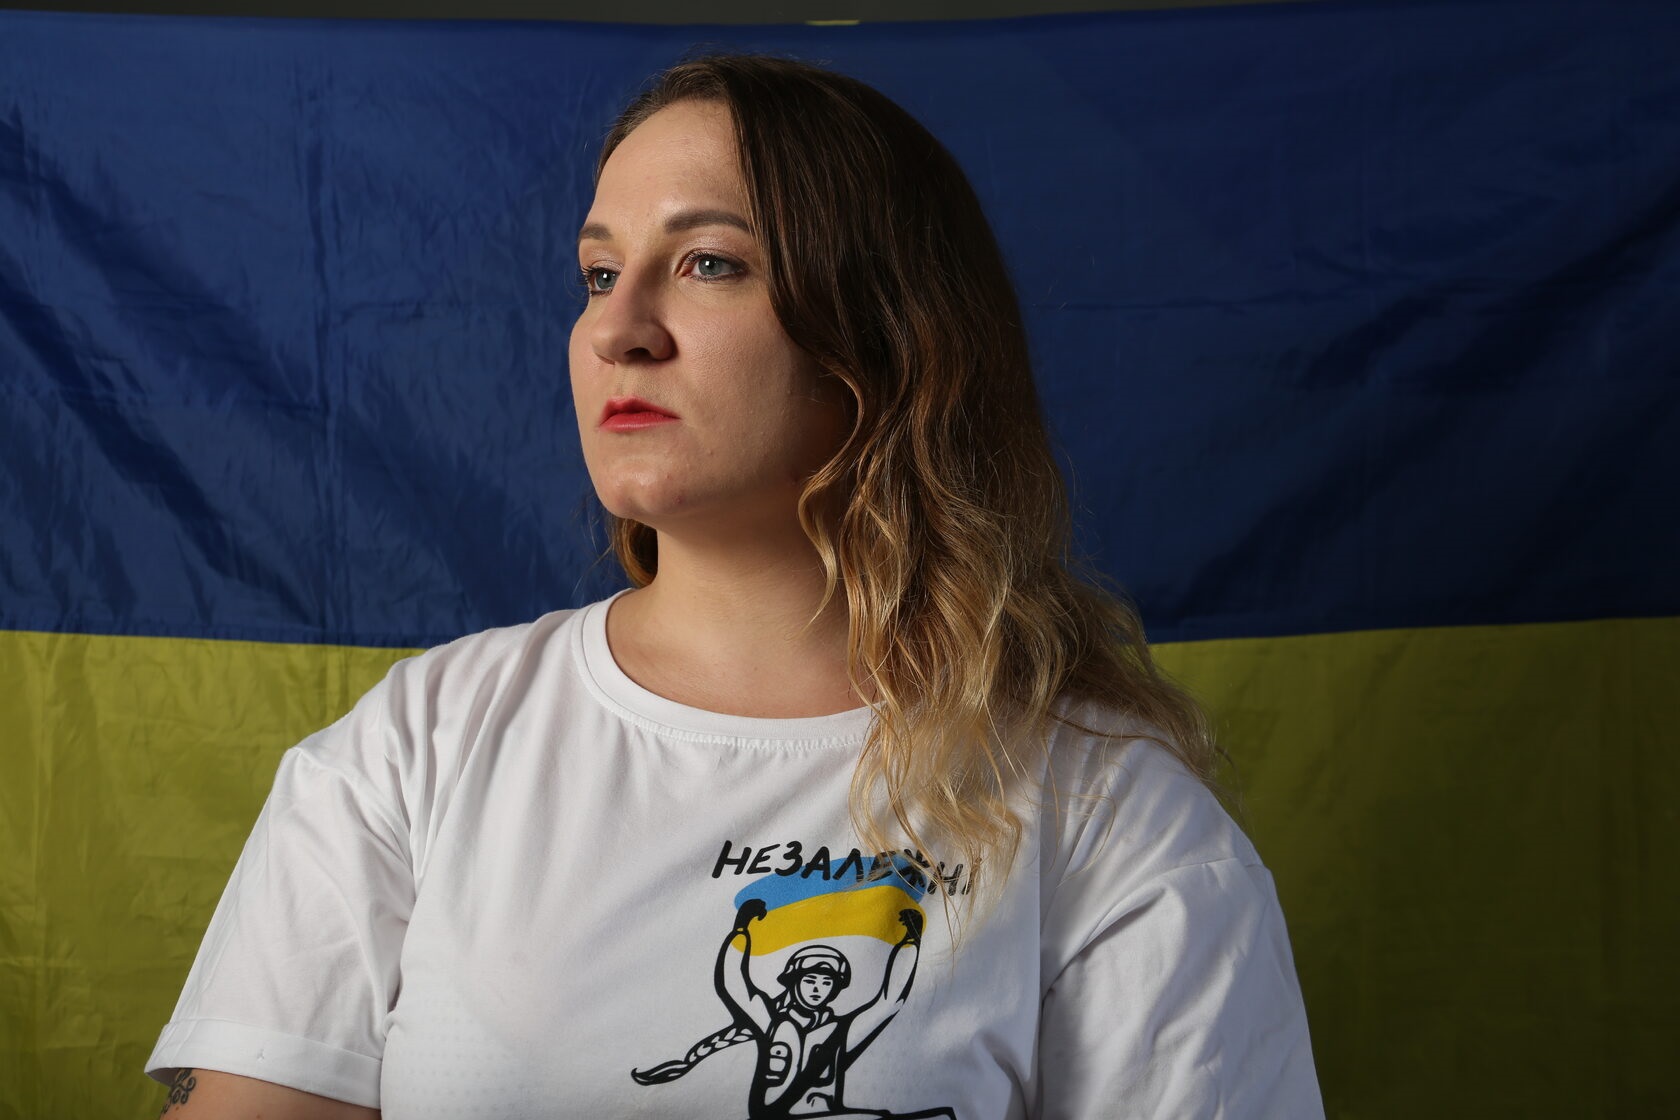 Children of Donbas tell story of girl who went to war to defend Ukraine